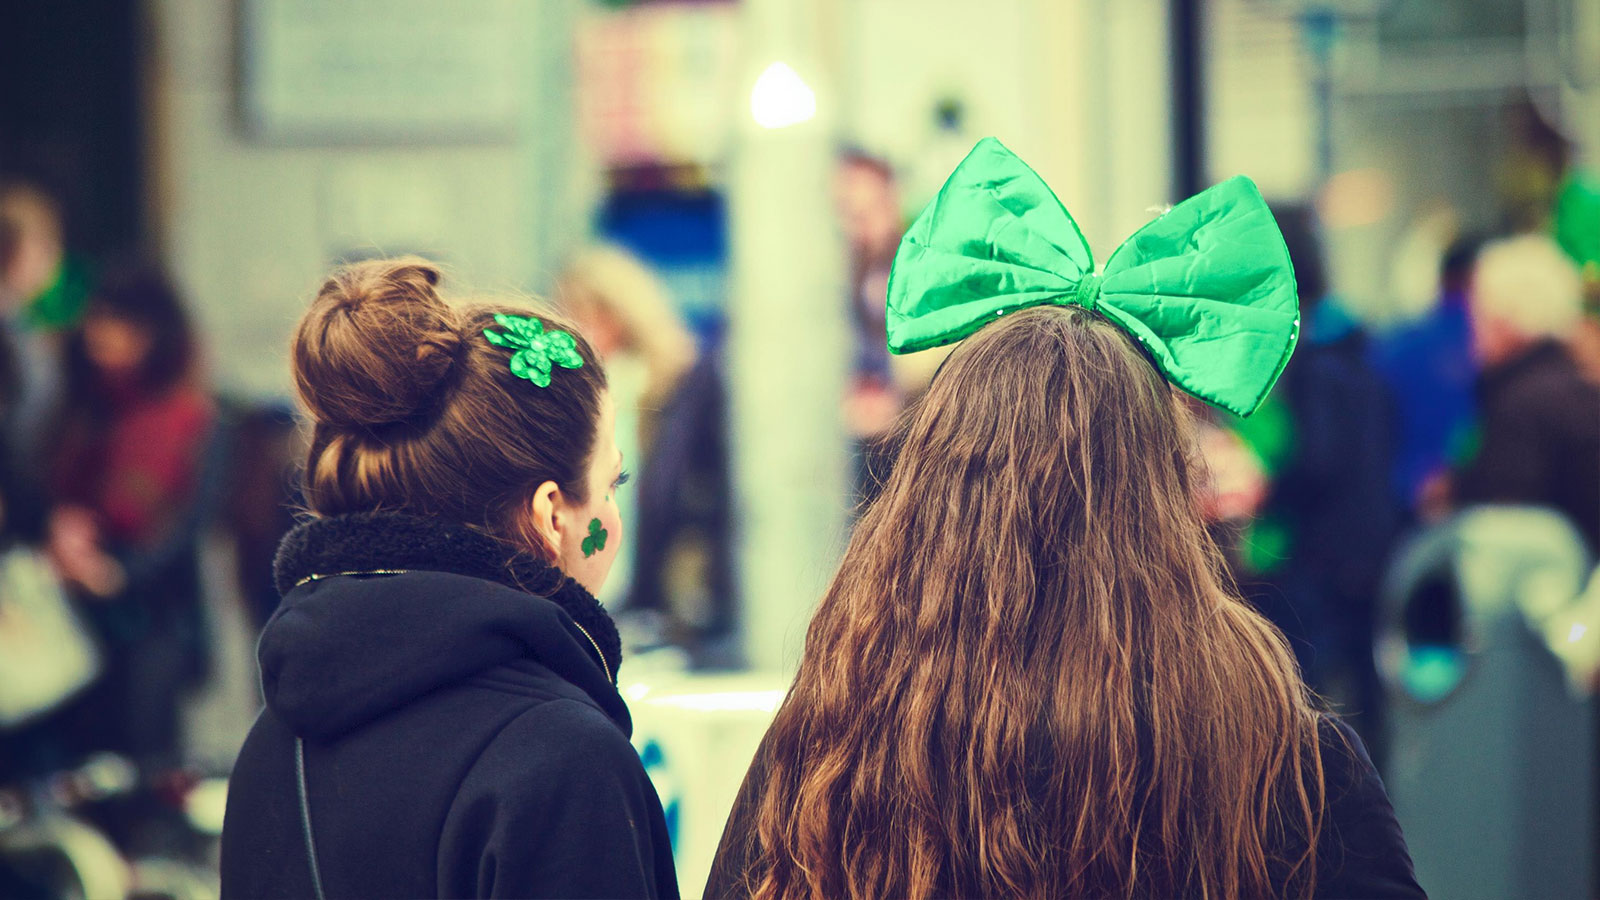 Two females, one with large green bow in hair and one with shamrock barrette and shamrock tattoo on her cheek